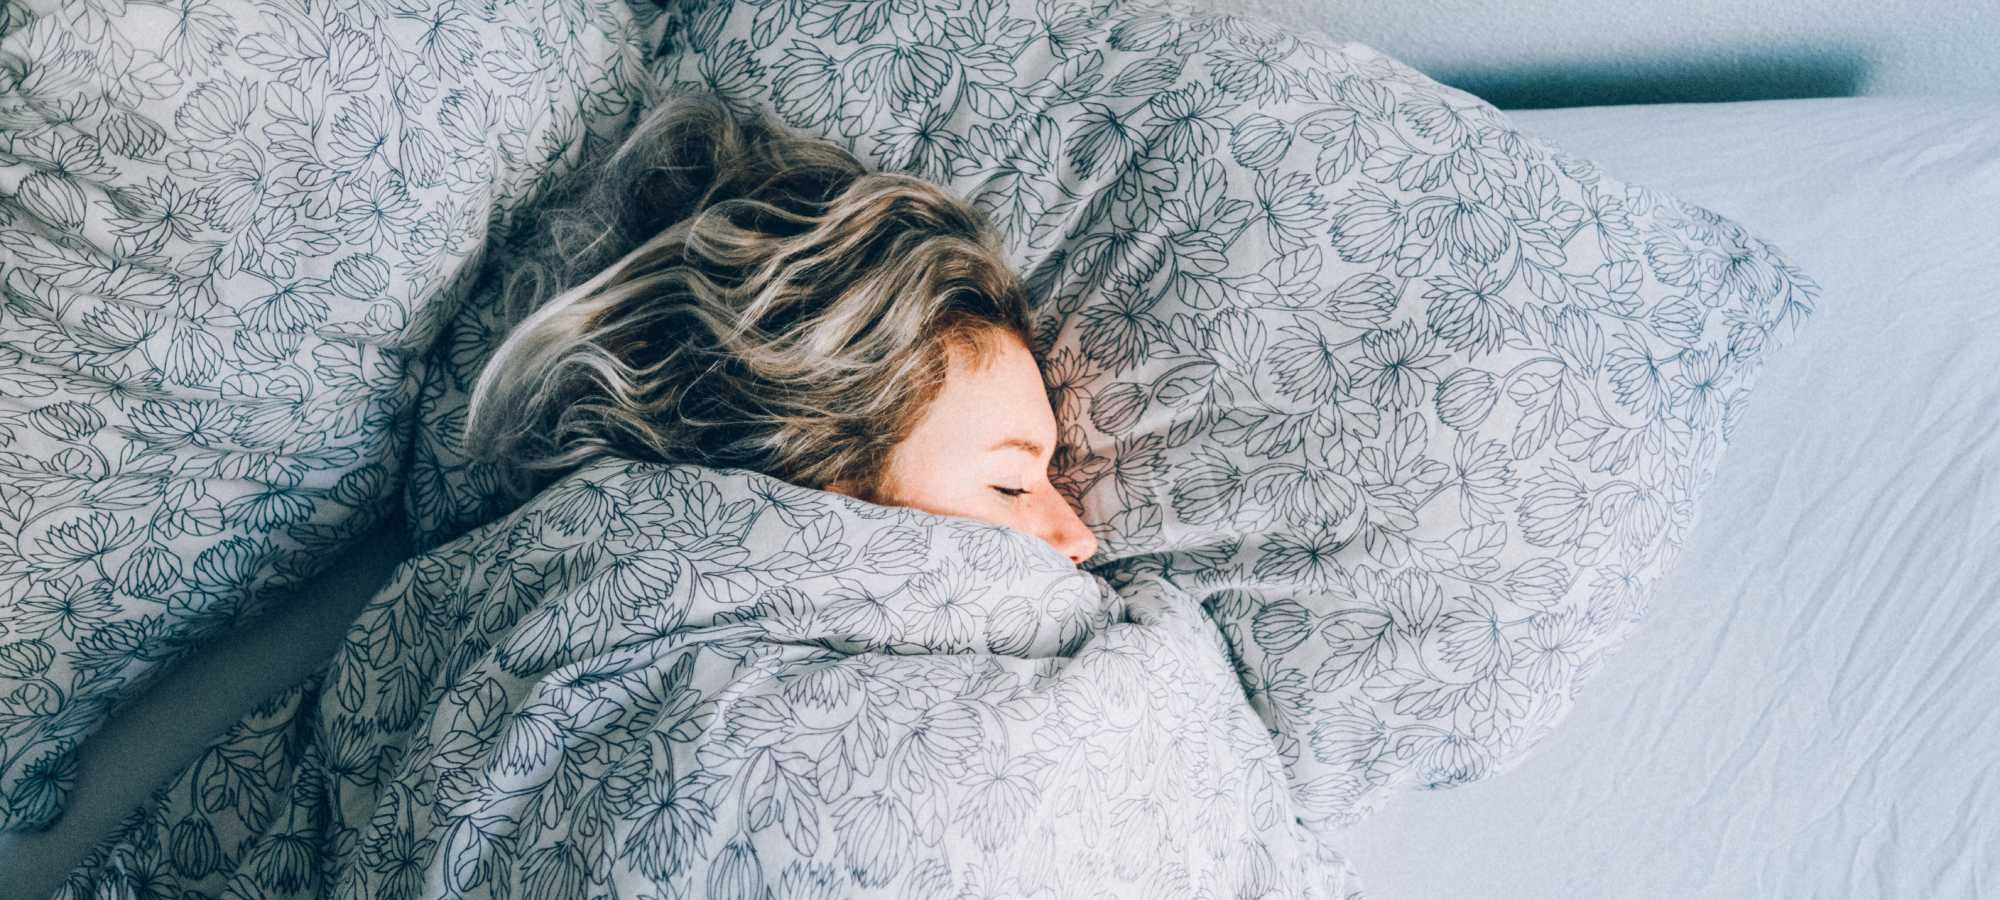 Blonde haired woman cozy under blankets